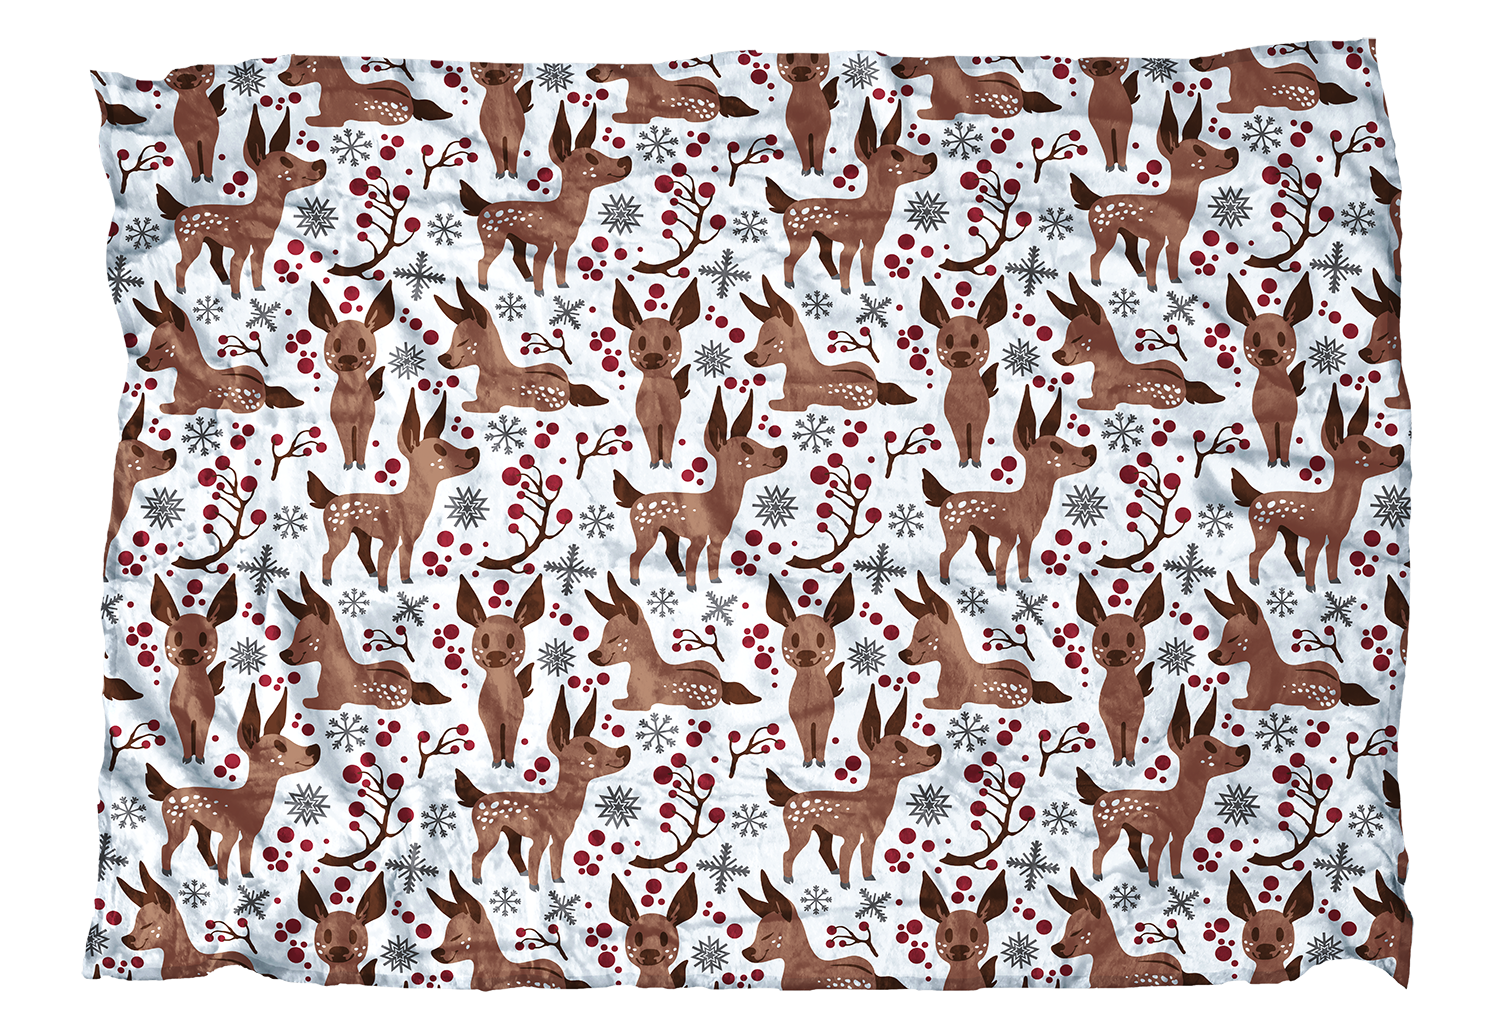 These fawns are ready for their first winter! This baby deer blanket with red accents is sweet addition to your winter decor.